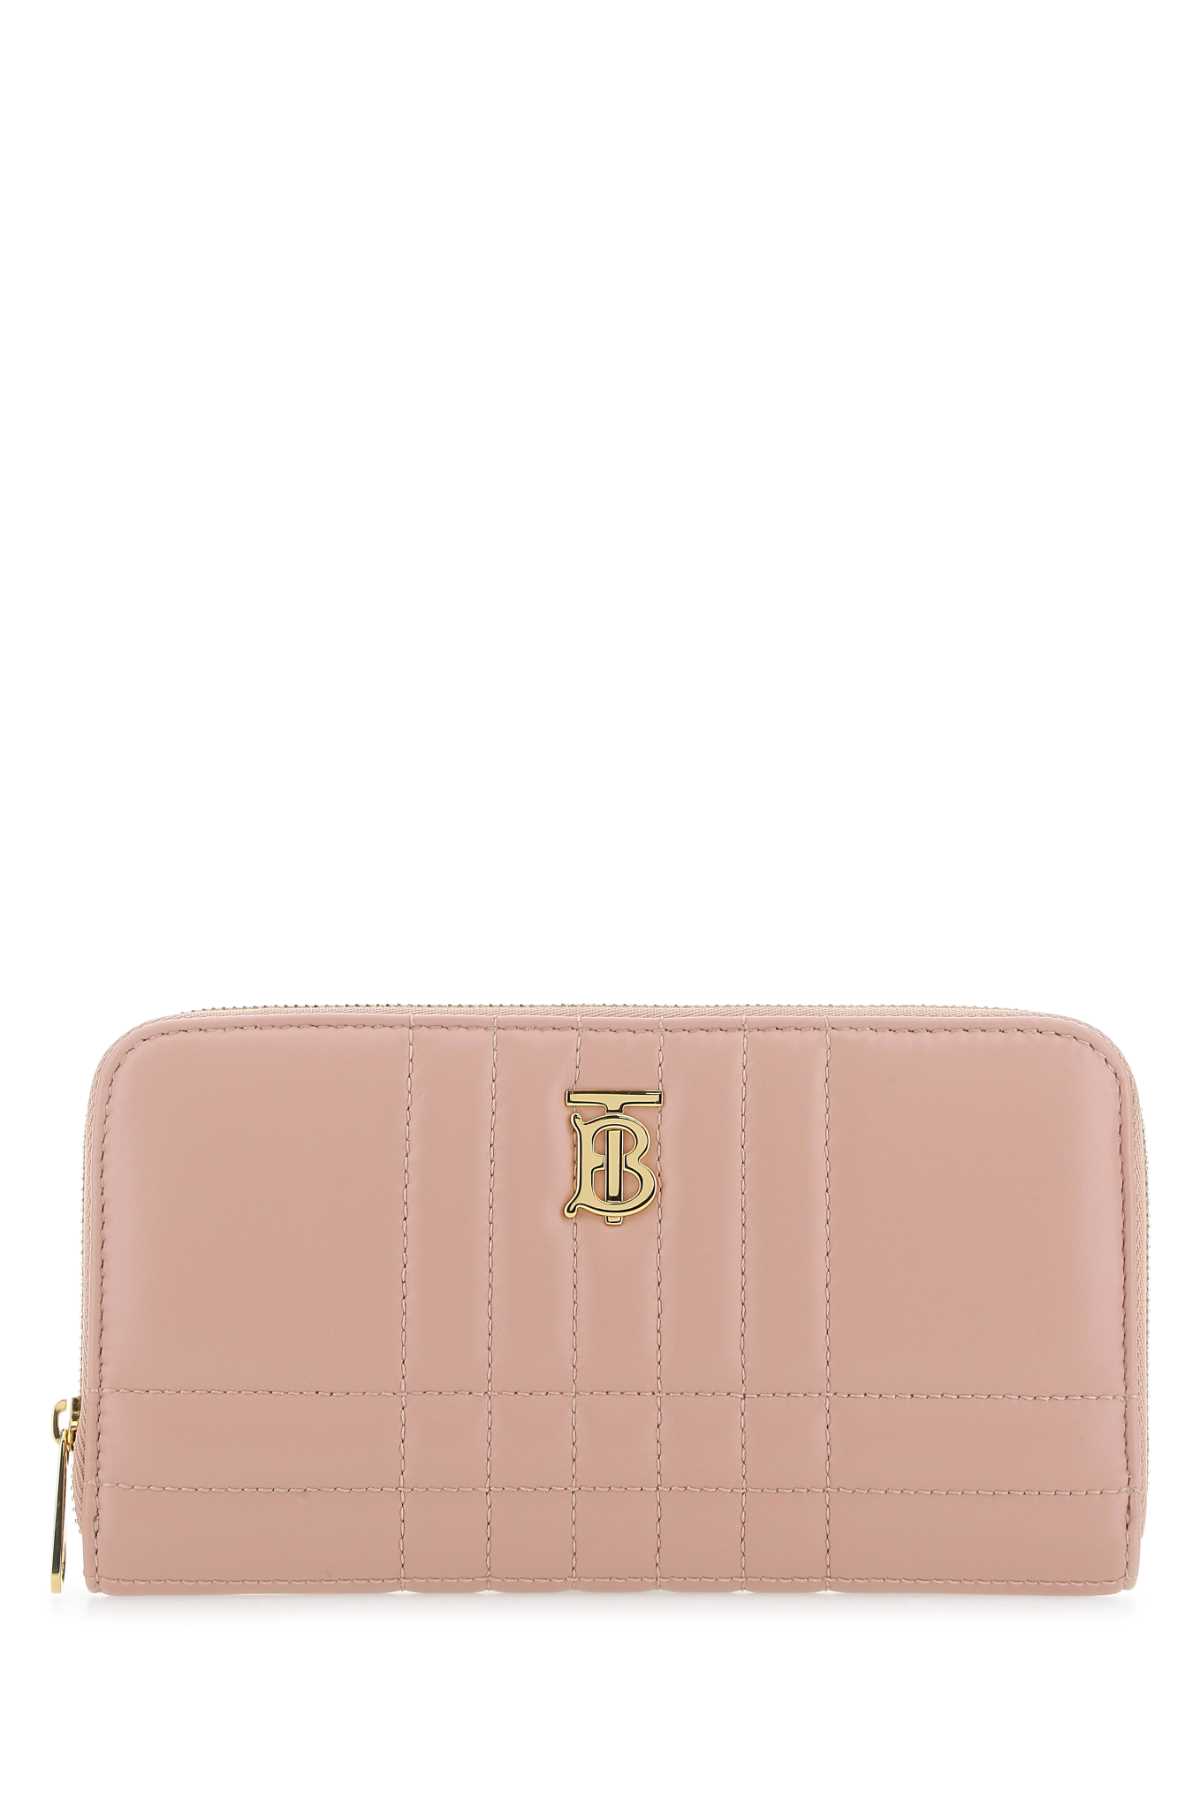 Burberry Pink Nappa Leather Lola Wallet